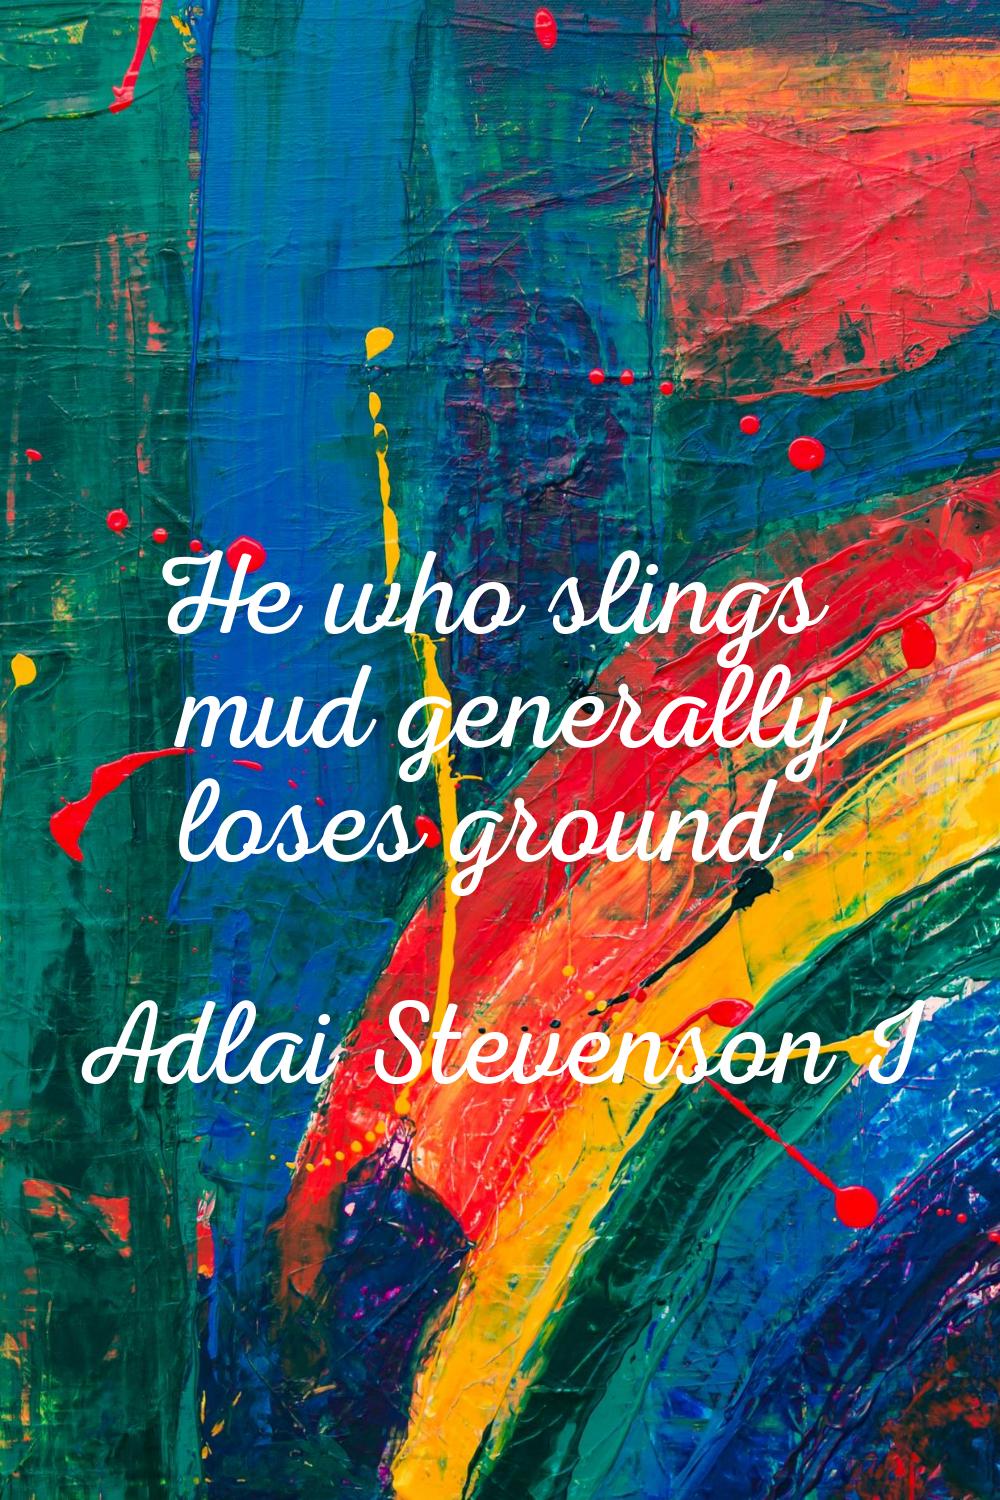 He who slings mud generally loses ground.